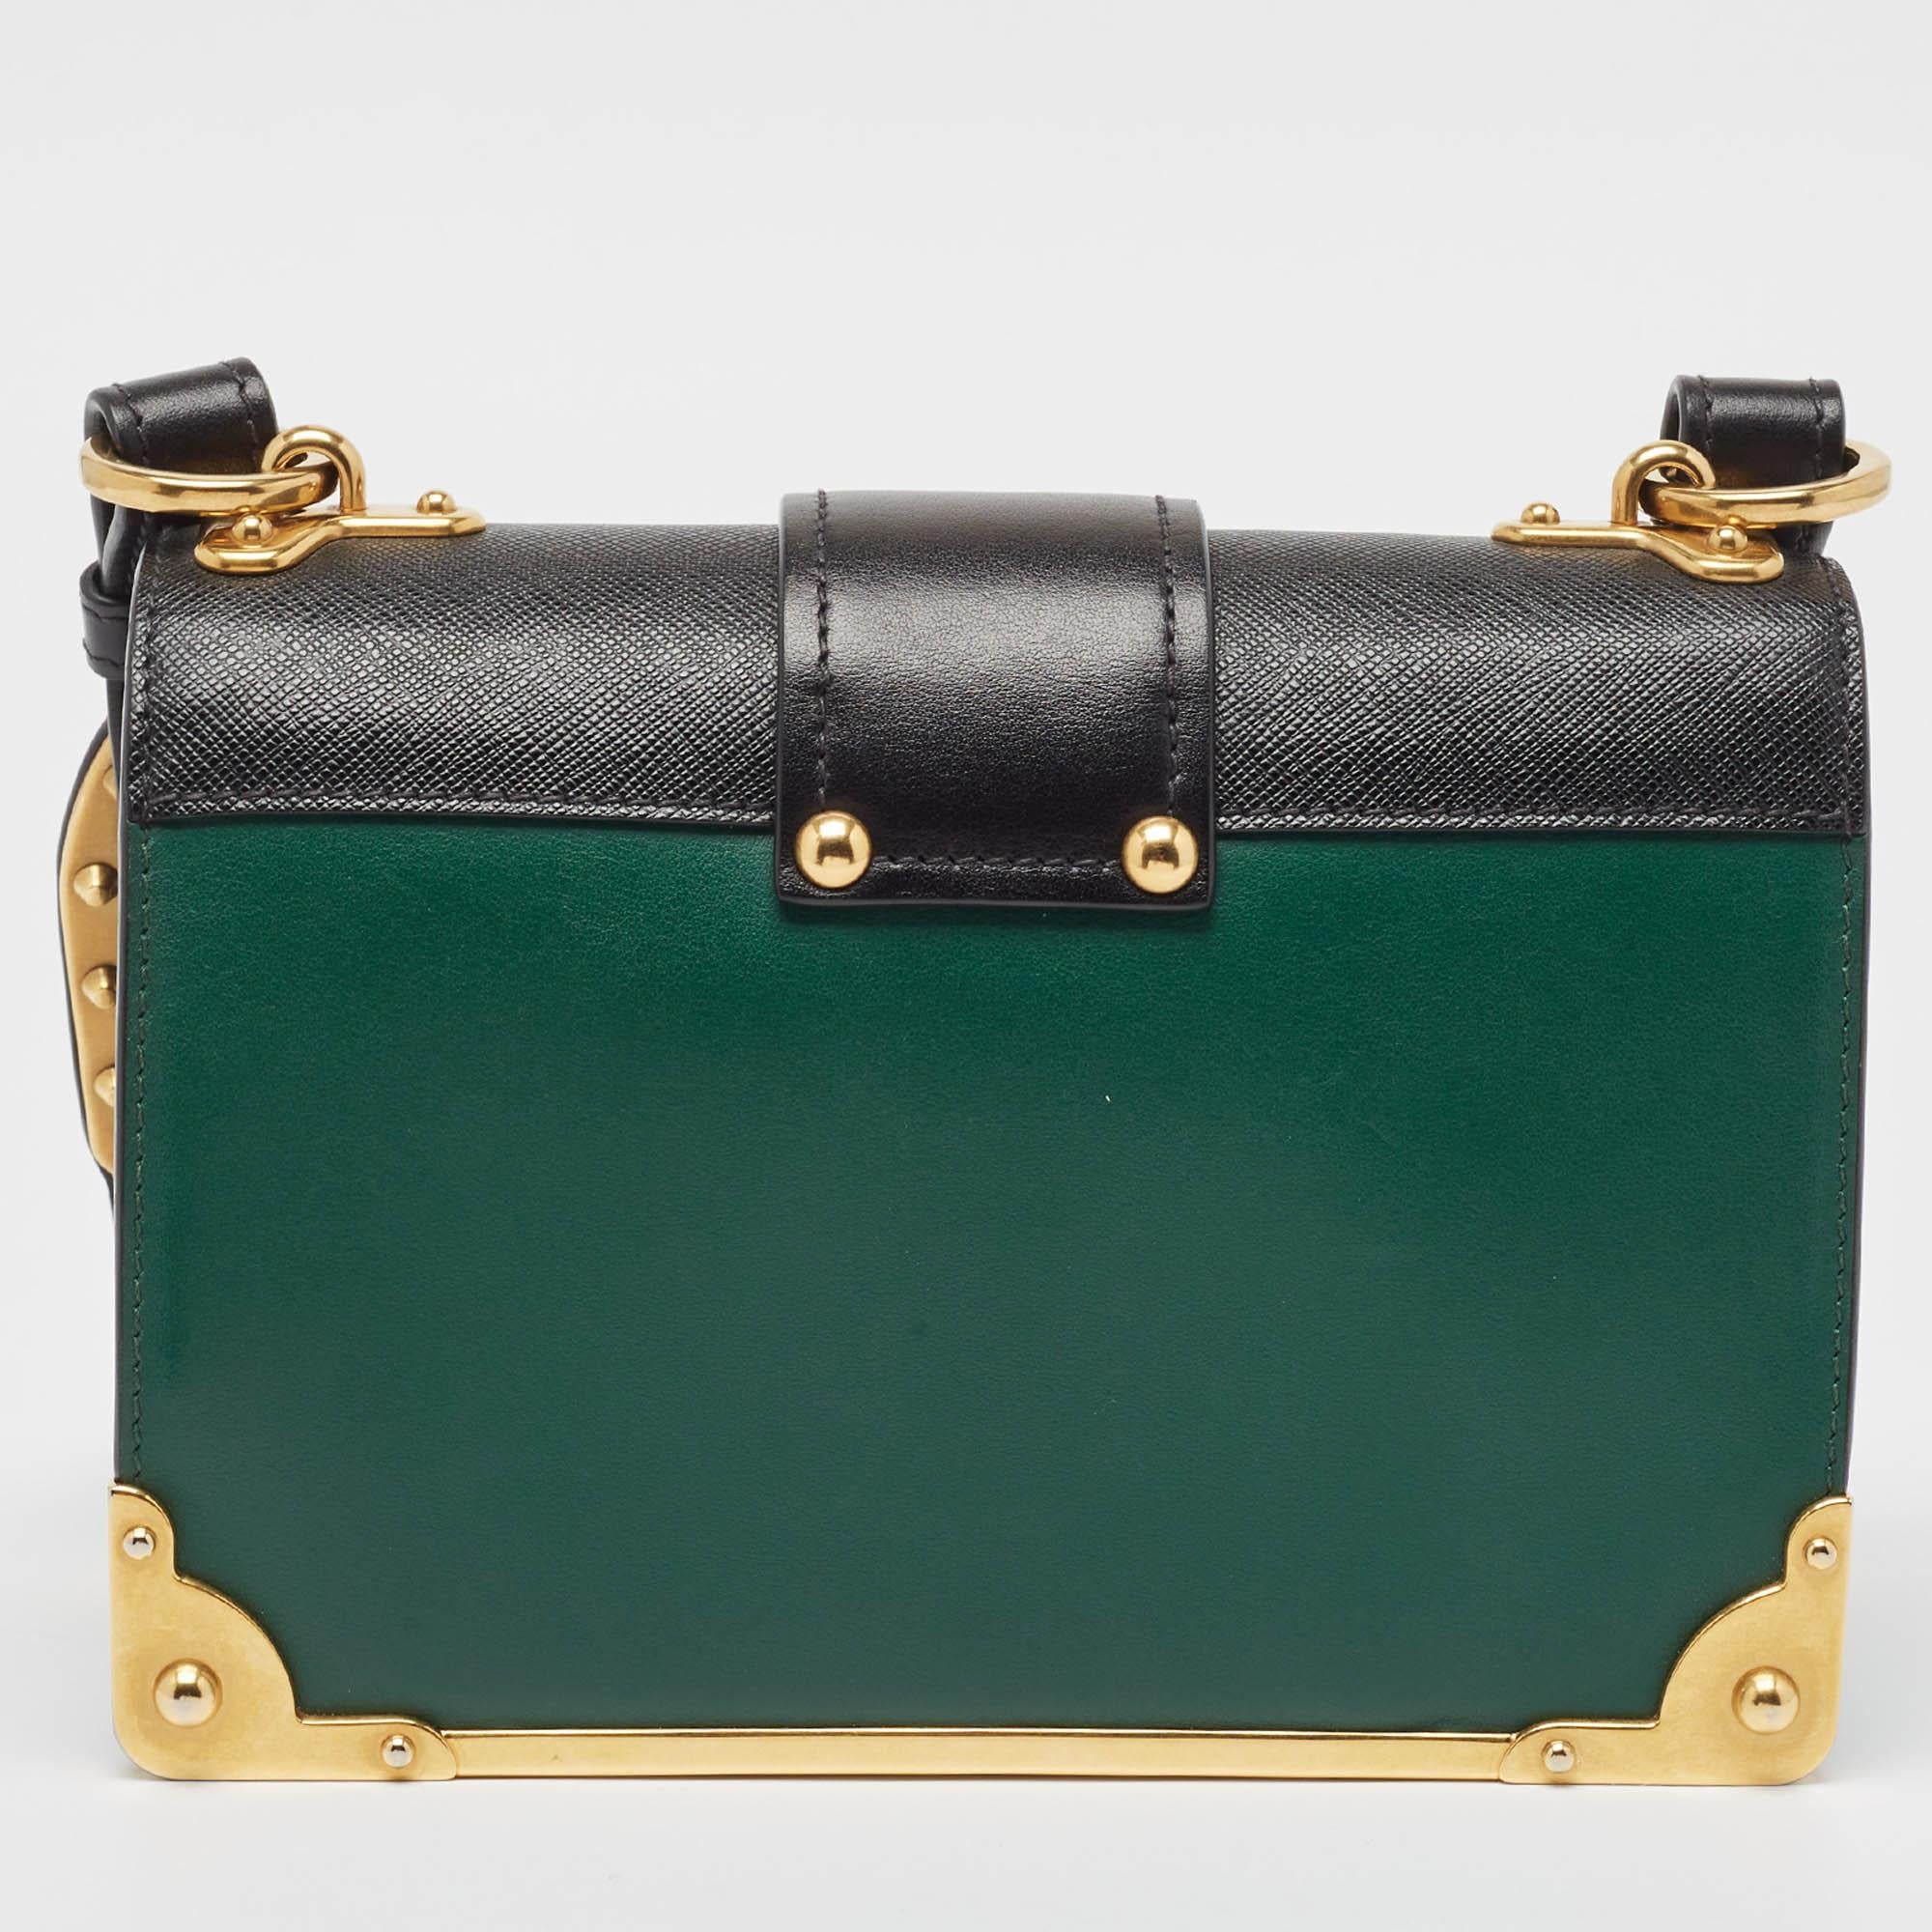 Inspired by valuable books from ancient times, the Cahier by Prada is a best-seller. This shoulder bag is crafted in Italy with black and green leather. It features gold-tone trims that add a touch of contrast. The strap closure with the brand logo